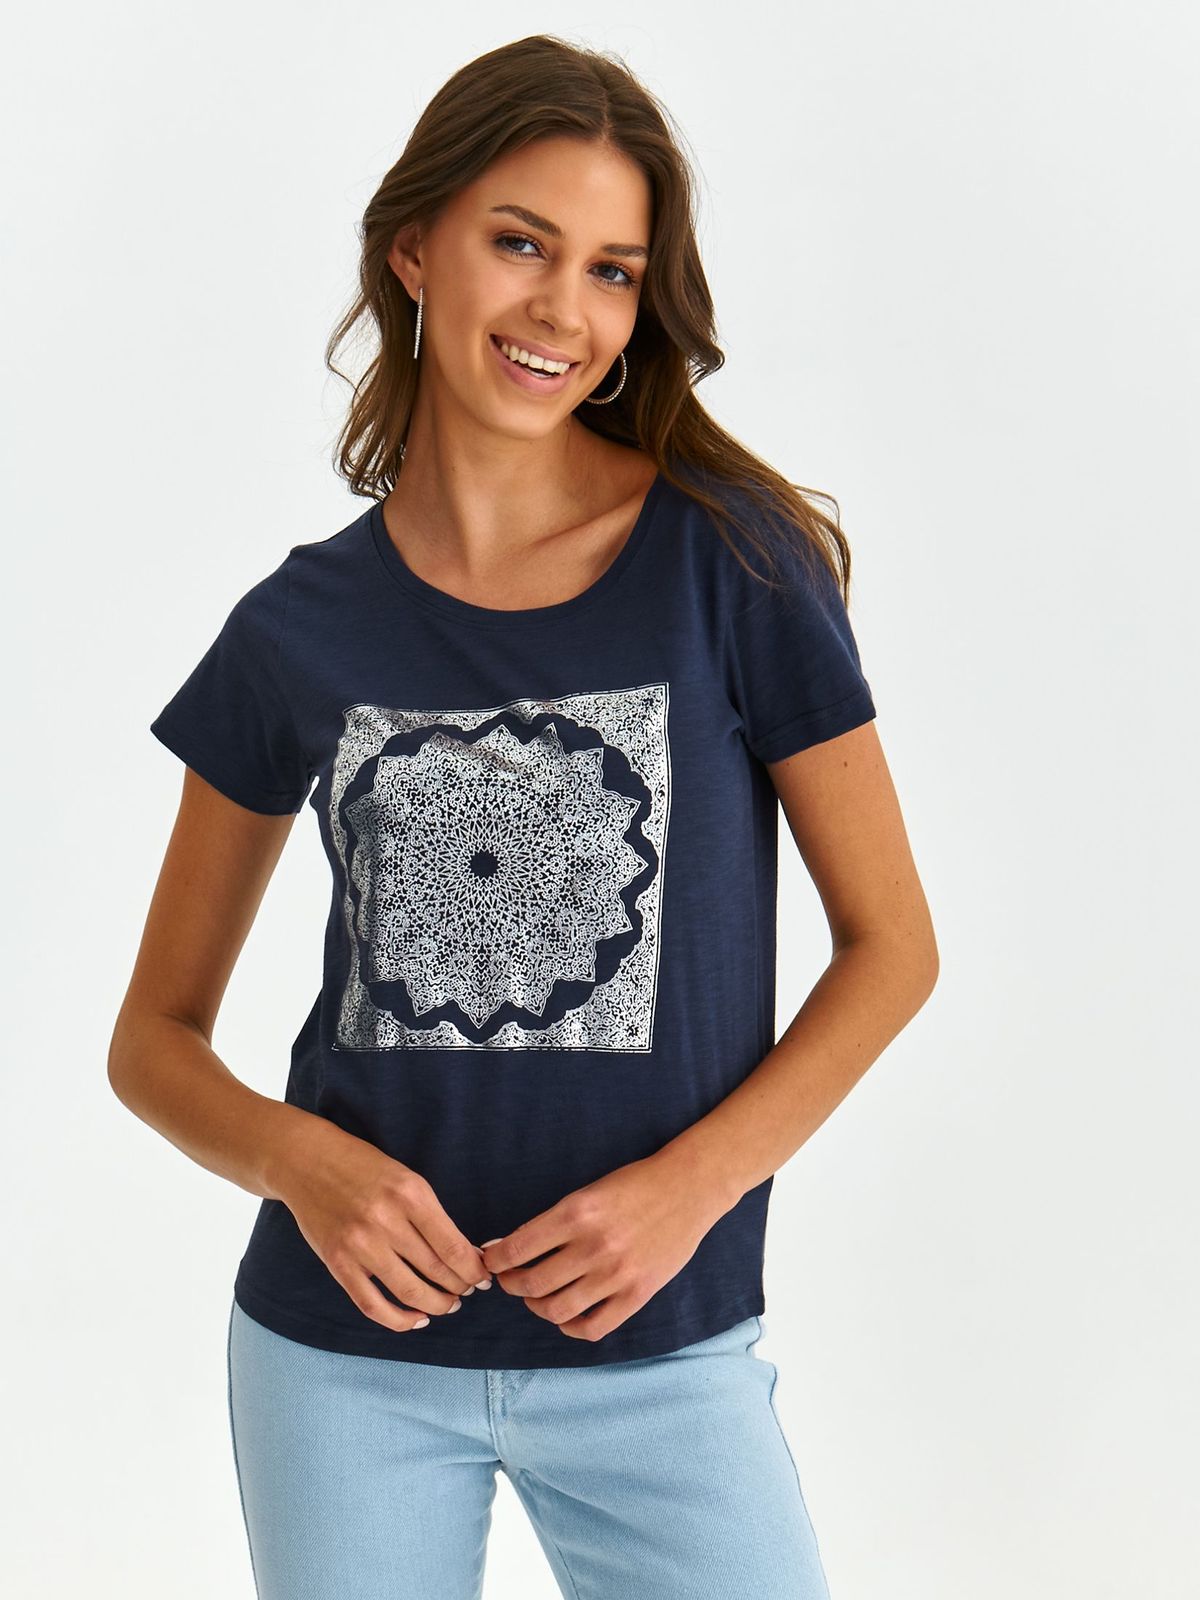 Darkblue t-shirt slightly elastic cotton loose fit abstract